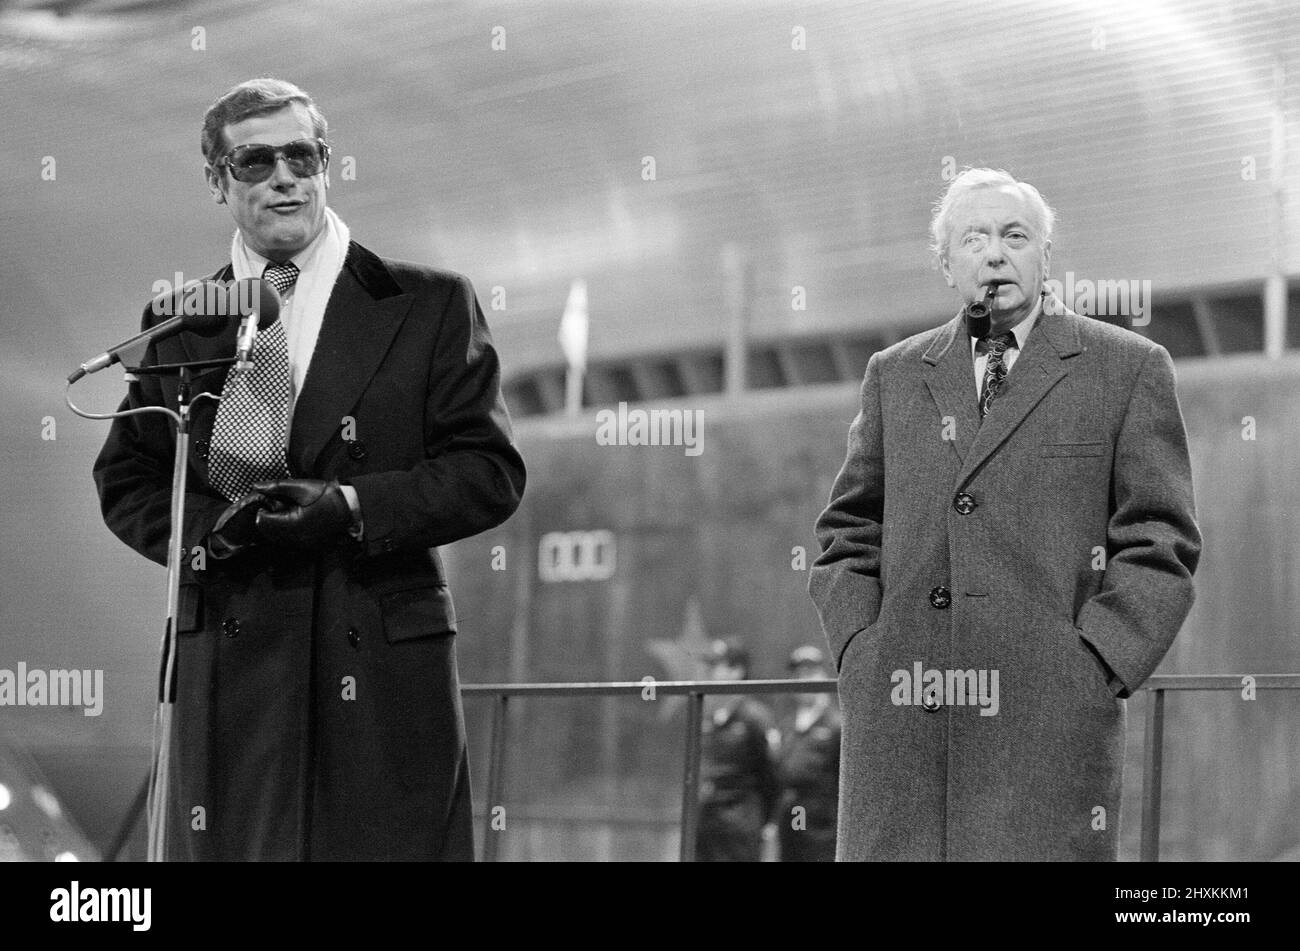 Sir Harold Wilson visited Pinewood Studios to officially open the largest film stage in the world which was created for scenes featuring a super tanker and three submarines in the latest James Bond epic ' The Spy Who Loved Me'. Sir Harold WIlson with Roger Moore. 5th December 1976. Stock Photo